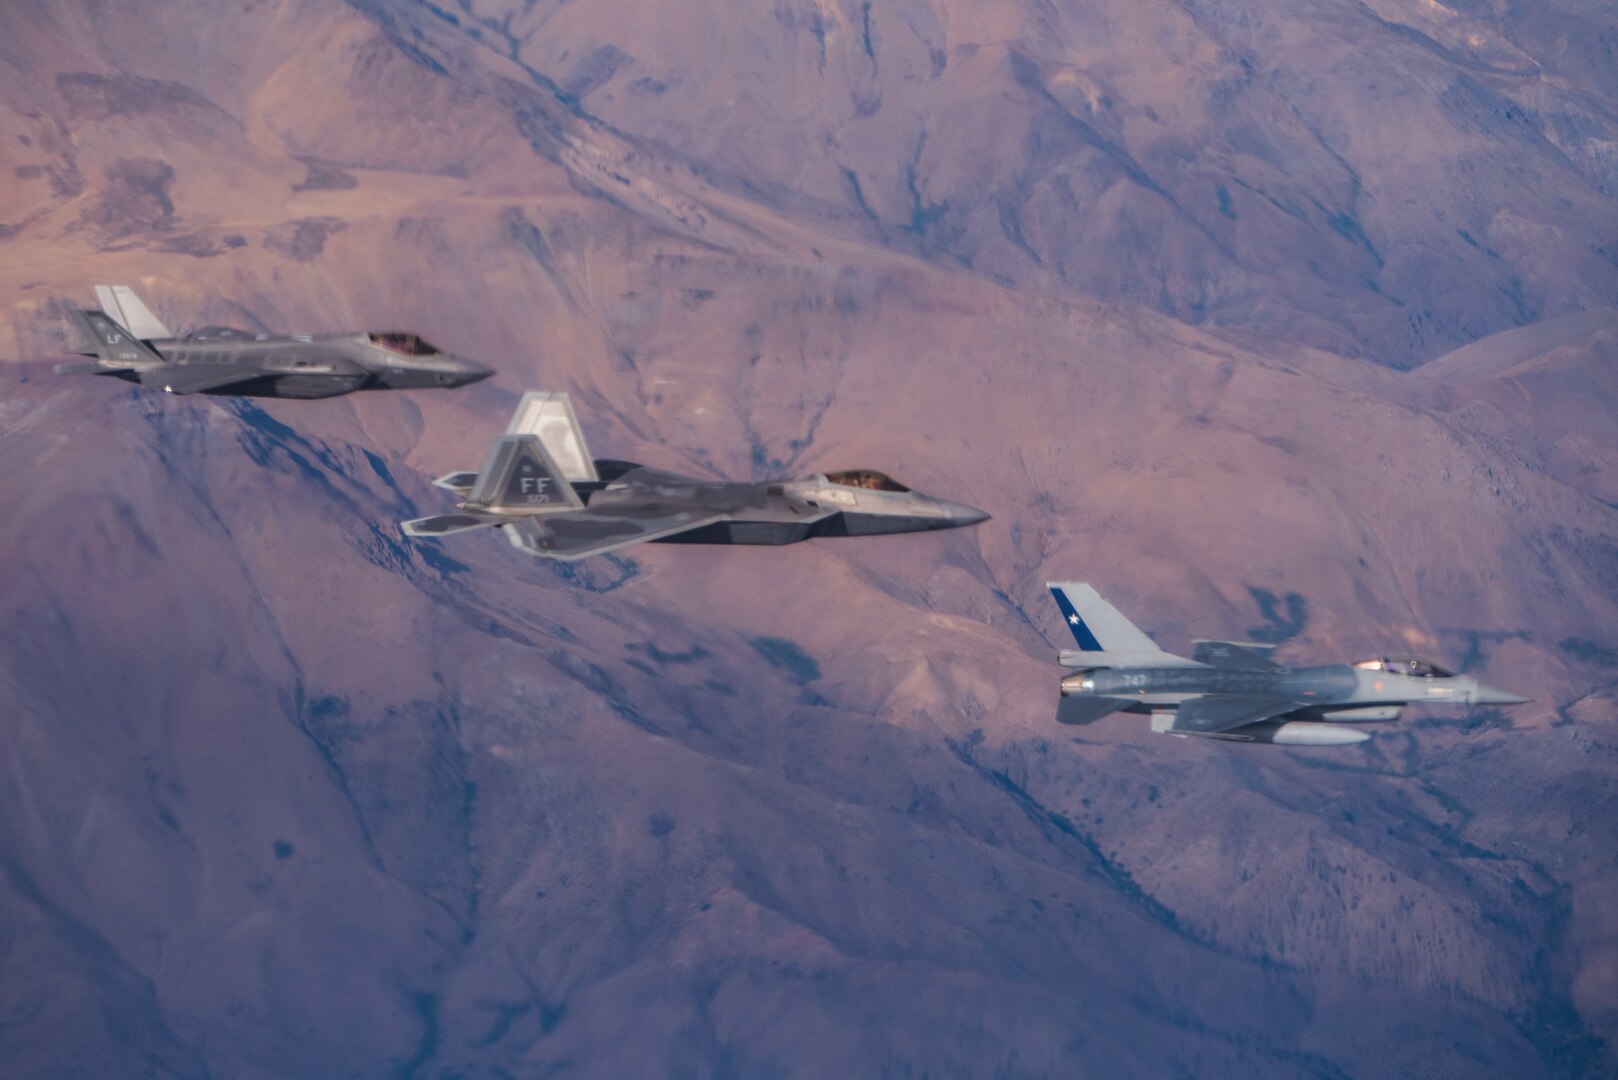 A U.S. Air Force F-35 Lightning II, F-22 Raptor and Chilean Air Force F-16 fly together during a formation flight before their arrival in Santiago, Chile for FIDAE 2018, March 30, 2018.  U.S. airmen participated in a variety of activities during the air show, including subject matter exchanges with the Chilean Air Force, aerial demonstrations, and interaction with the local community.  (U.S. Air Force photo by Staff Sgt. Danny Rangel)